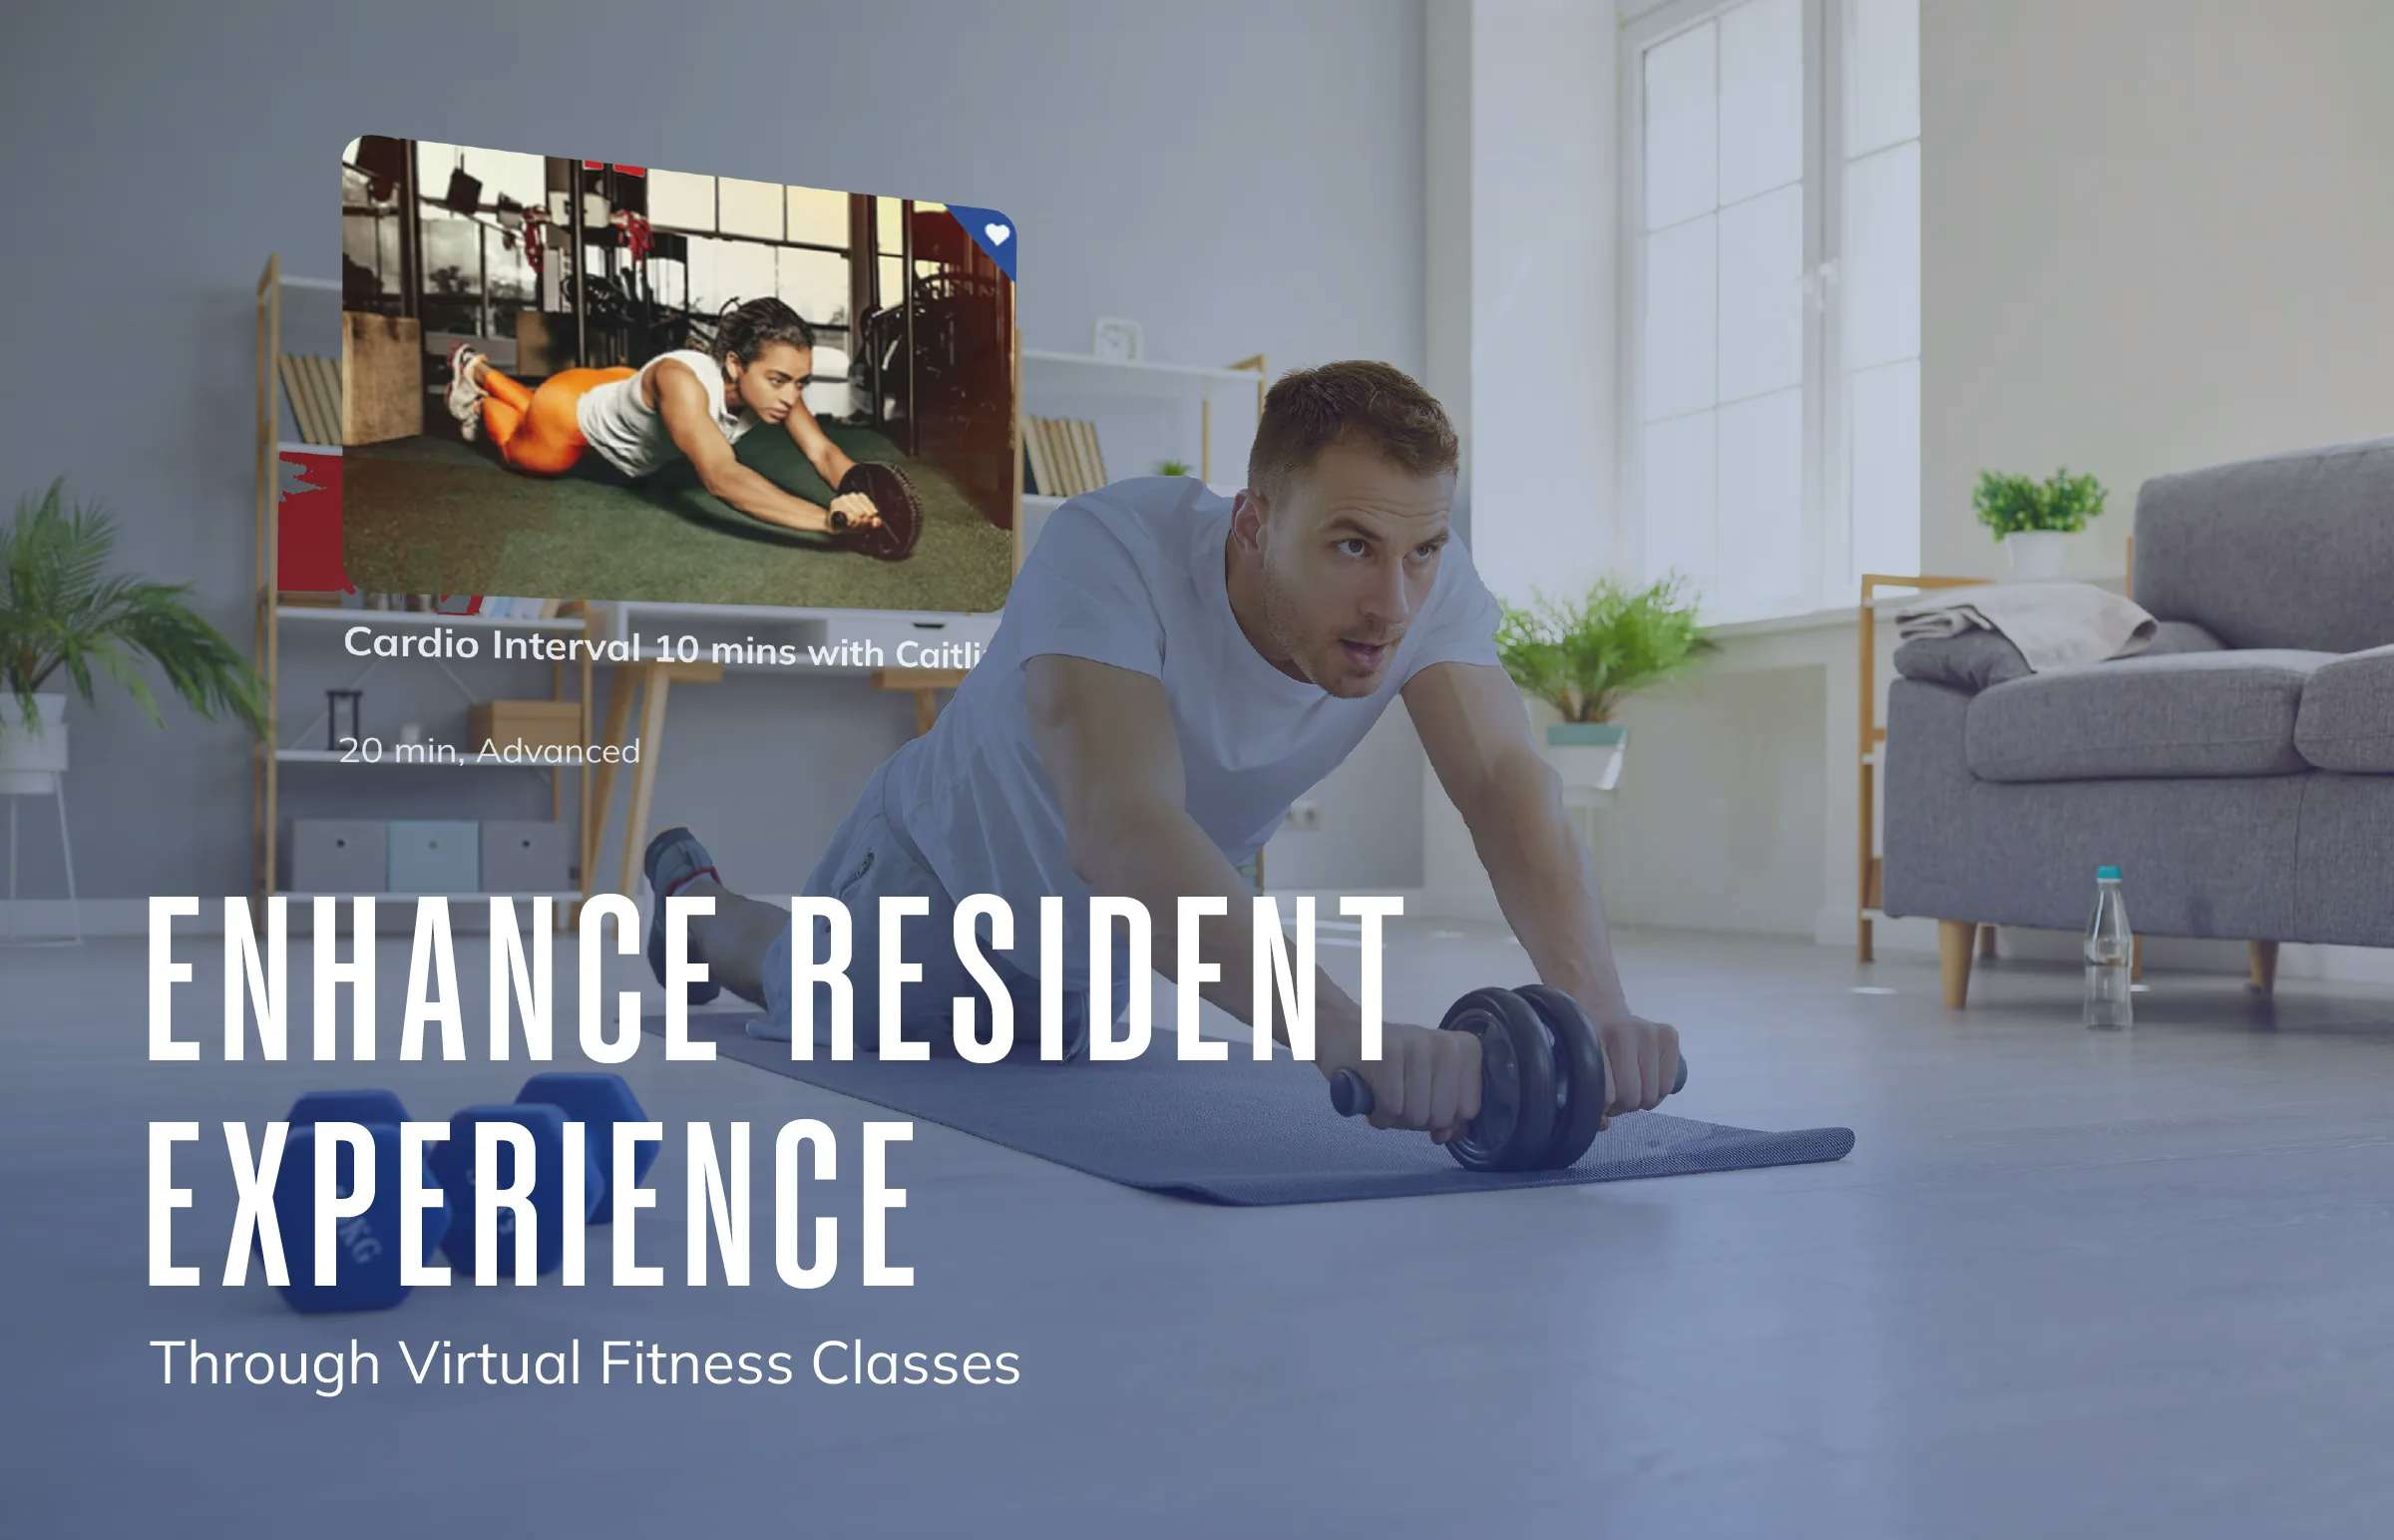 How to Enhance Resident Experience